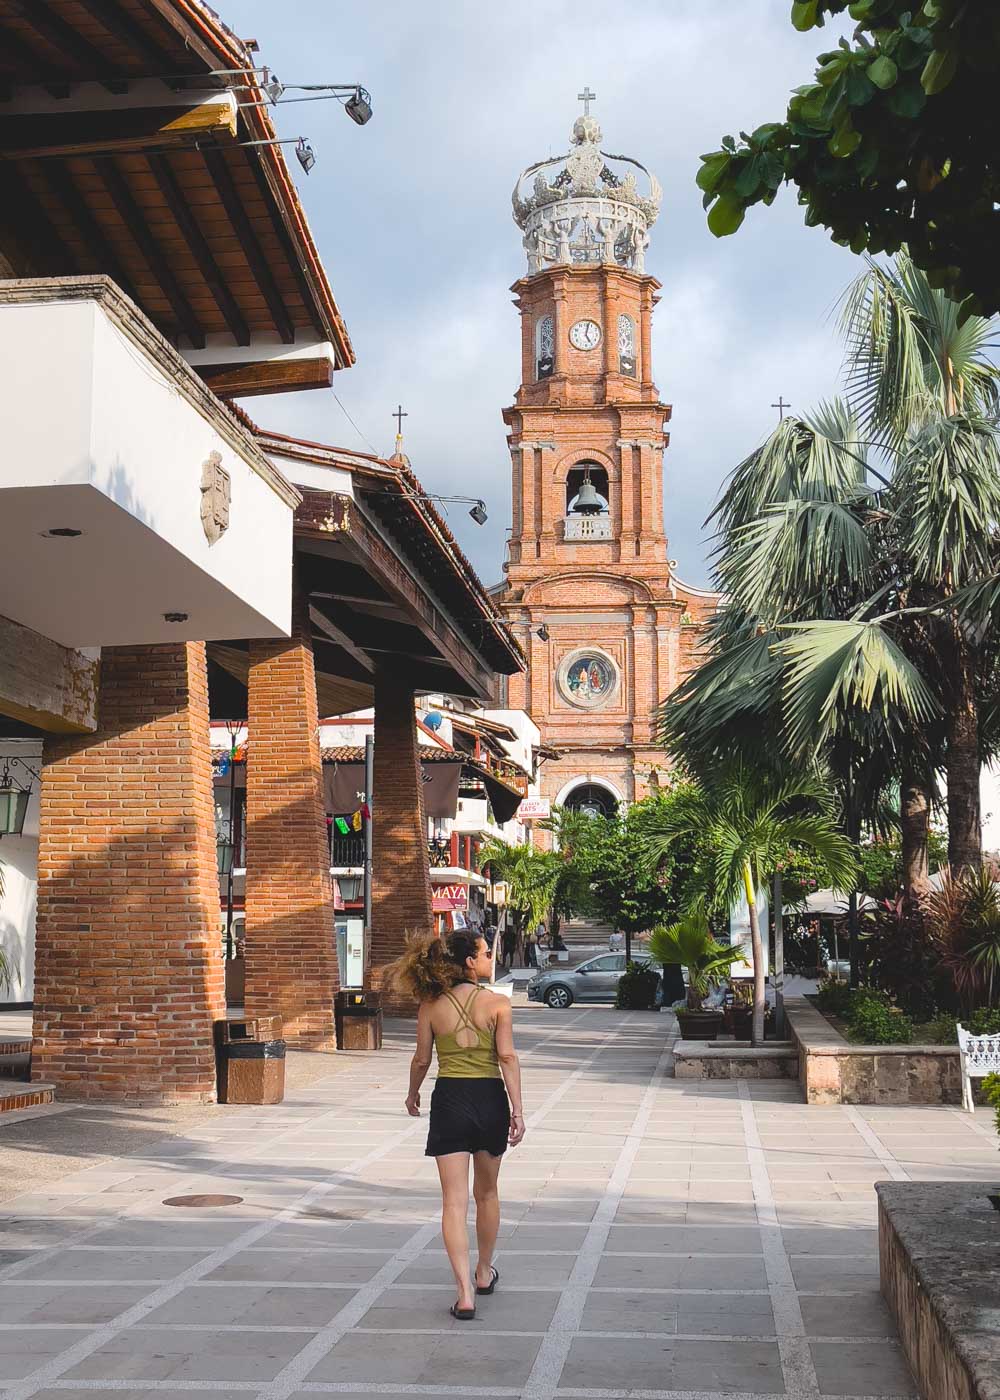 Nina walking between palm trees and buildings heading towards the Church of our Lady Guadalupe in Puerto Vallarta.